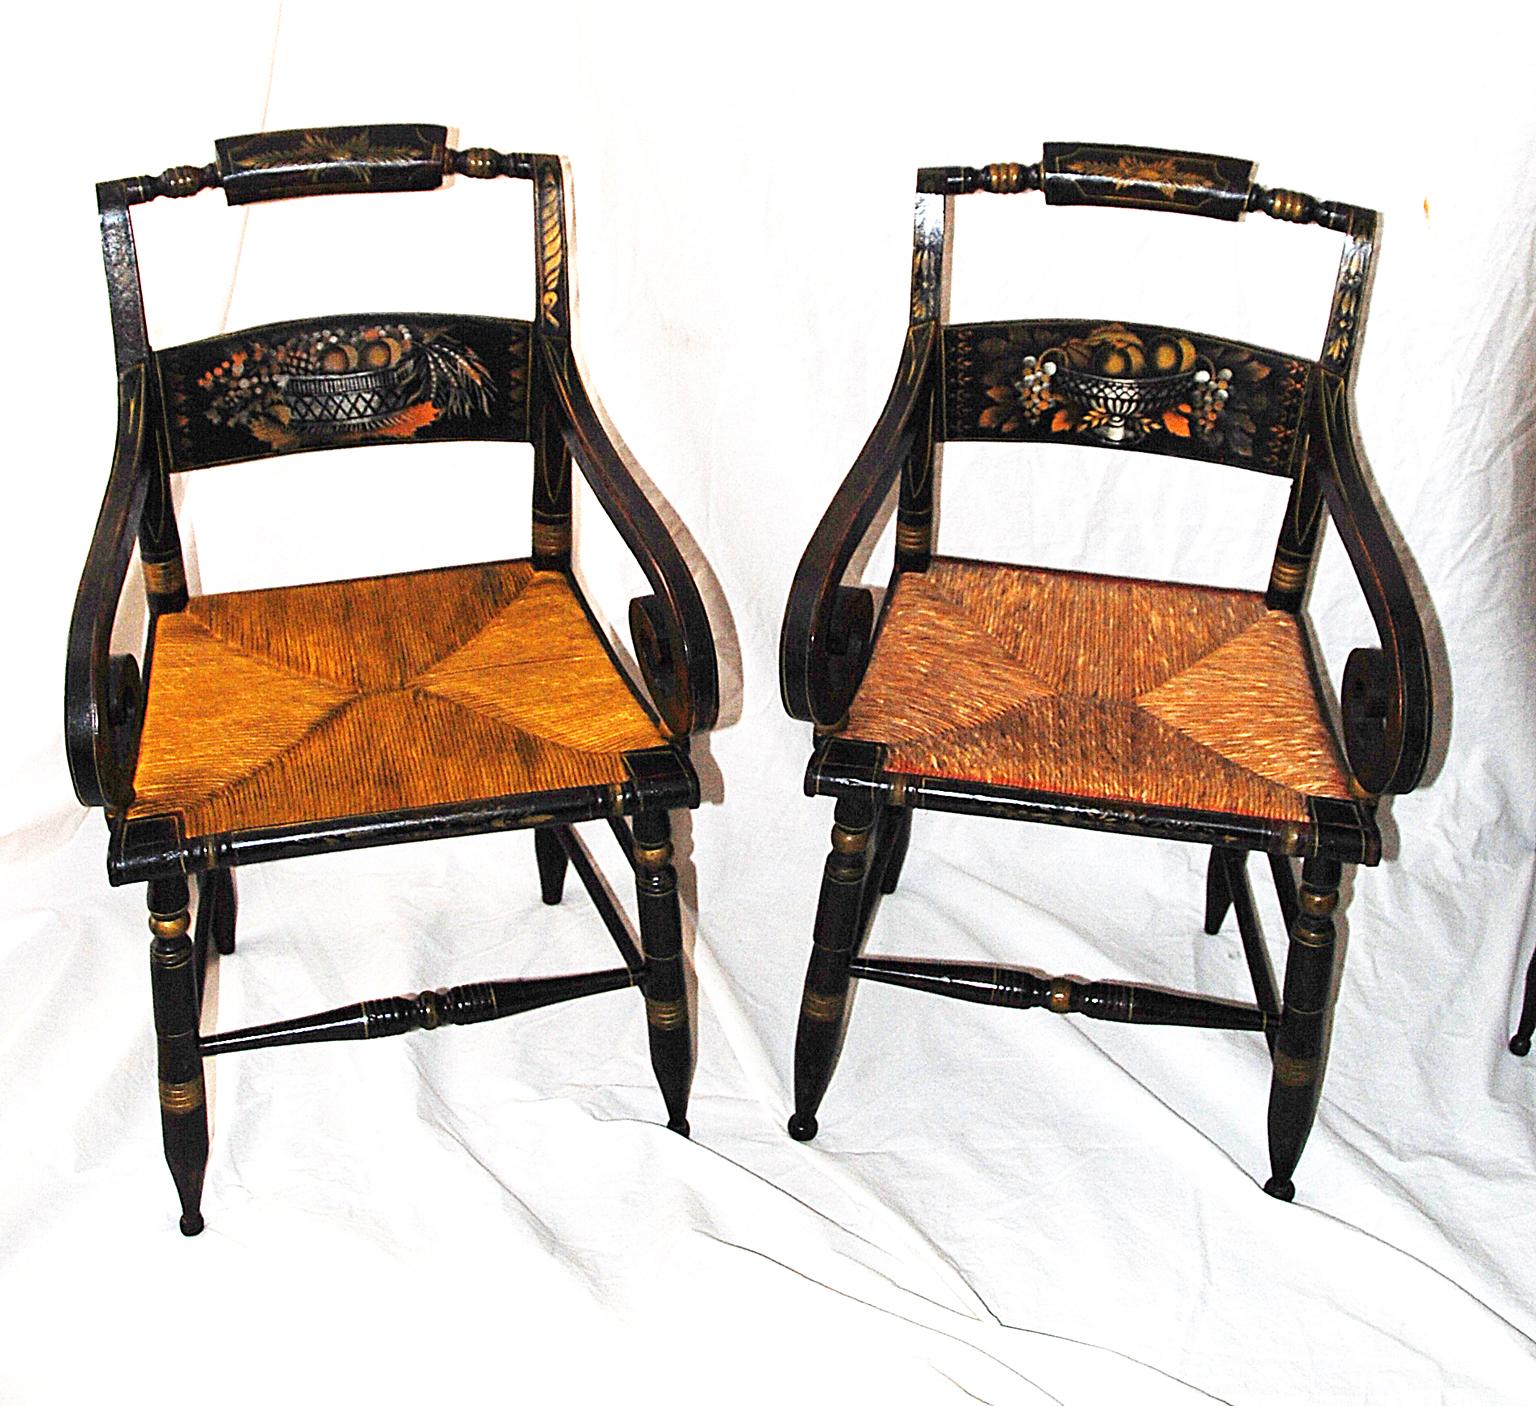 American set of eight Hitchcock 19th century chairs including two armchairs and six sidechairs. The armchairs have wonderful bold scroll arms. All eight chairs have stenciled backs of a basket of fruit and grains which sit on a black background. The